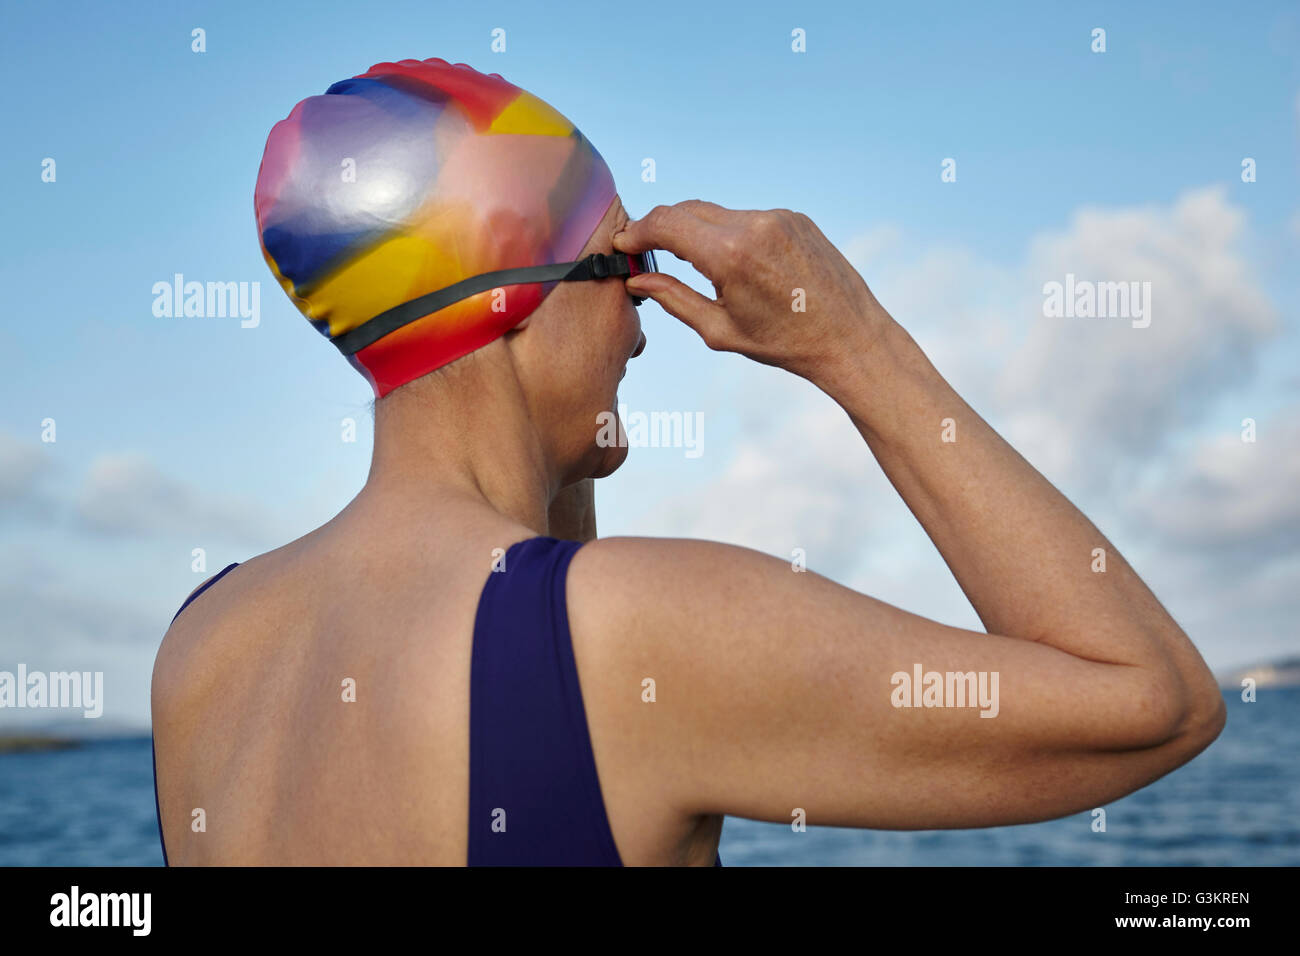 Mature woman wearing swimming costume and swimming hat, standing beside the sea, adjusting swimming goggles, rear view Stock Photo